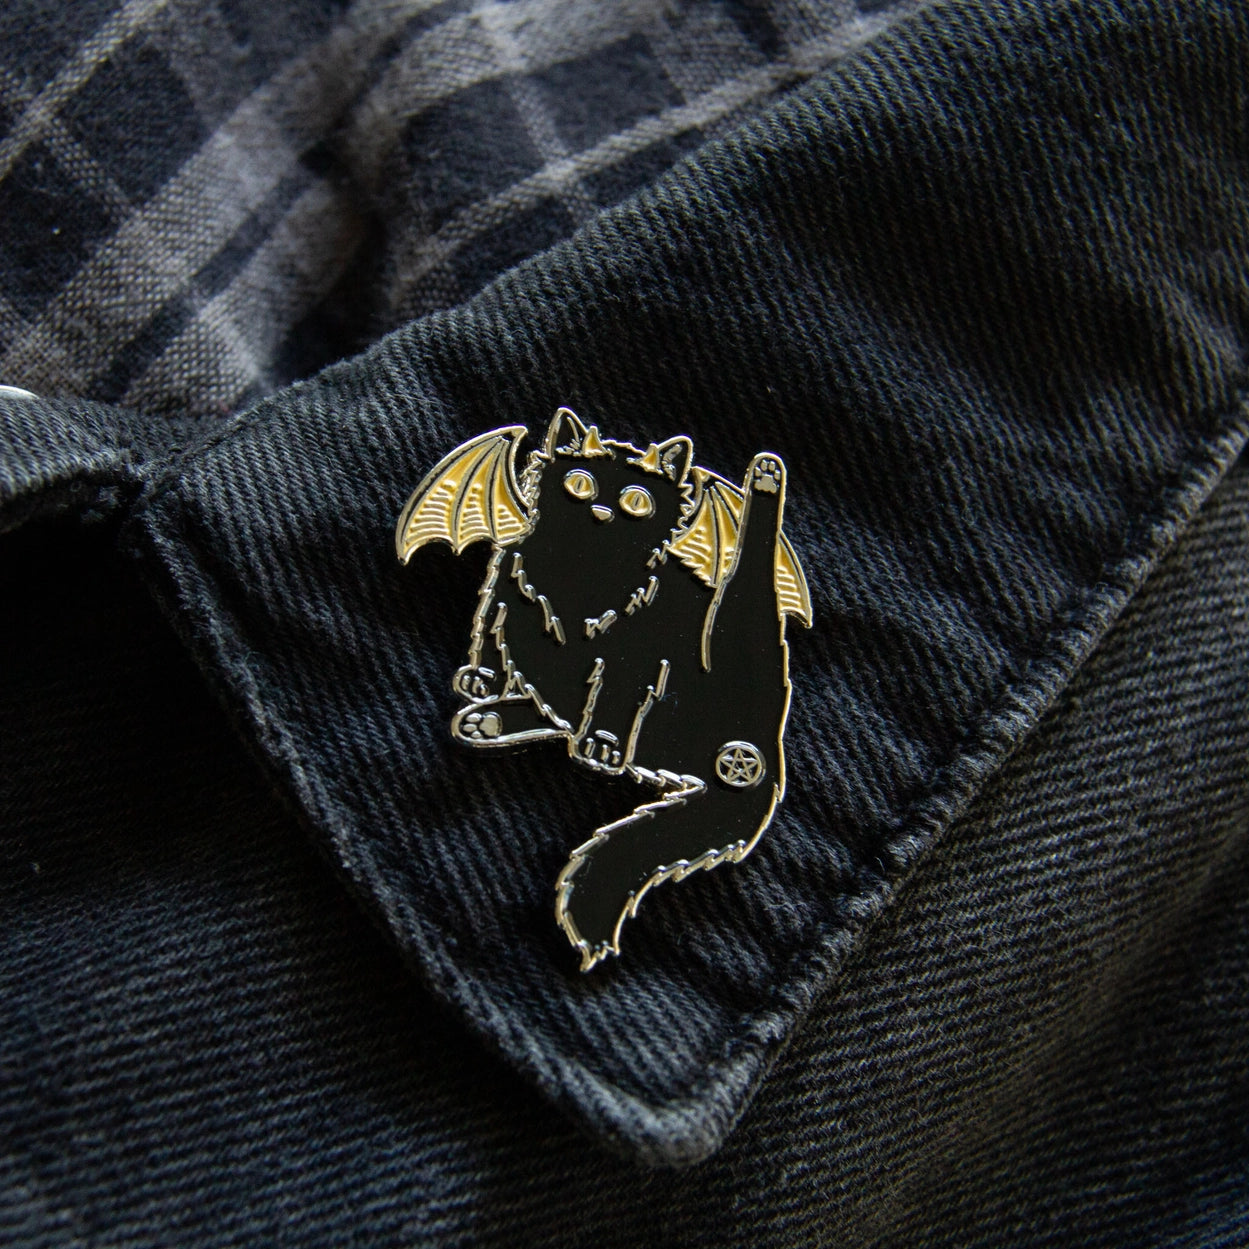 An enamel pin in the shape of a black cat, with yellow bat-like wings, affixed to a dark denim collar. One of the cat’s hind legs is lifted, and the cat’s butthole is covered by a pentagram.